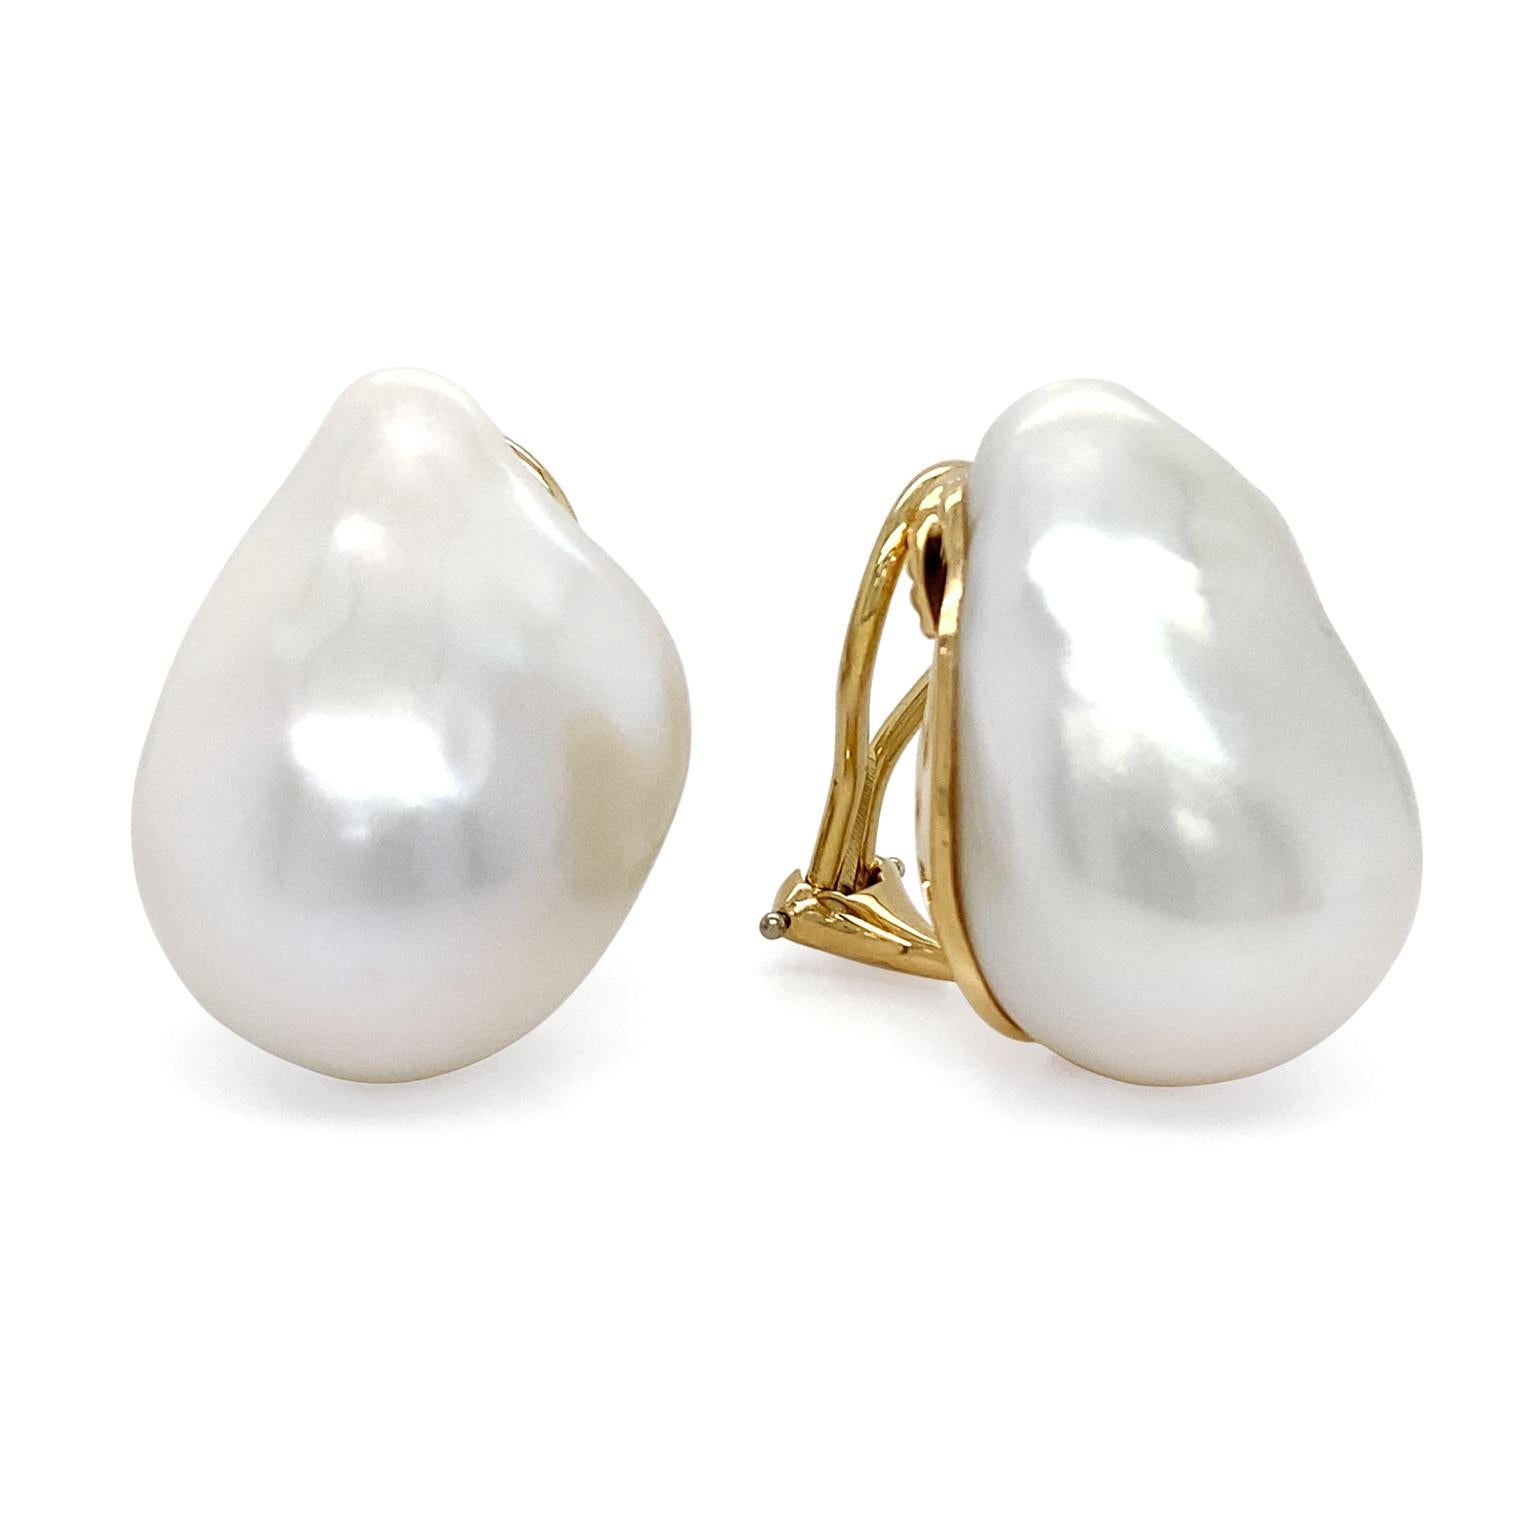 The unique beauty of the freshwater pearl is spotlighted as the exclusive gem in these earrings. As the light falls upon the various rifts, a special luster is given. Clip-backs secure the earrings, which contain 88.26 carats of pearls and measure